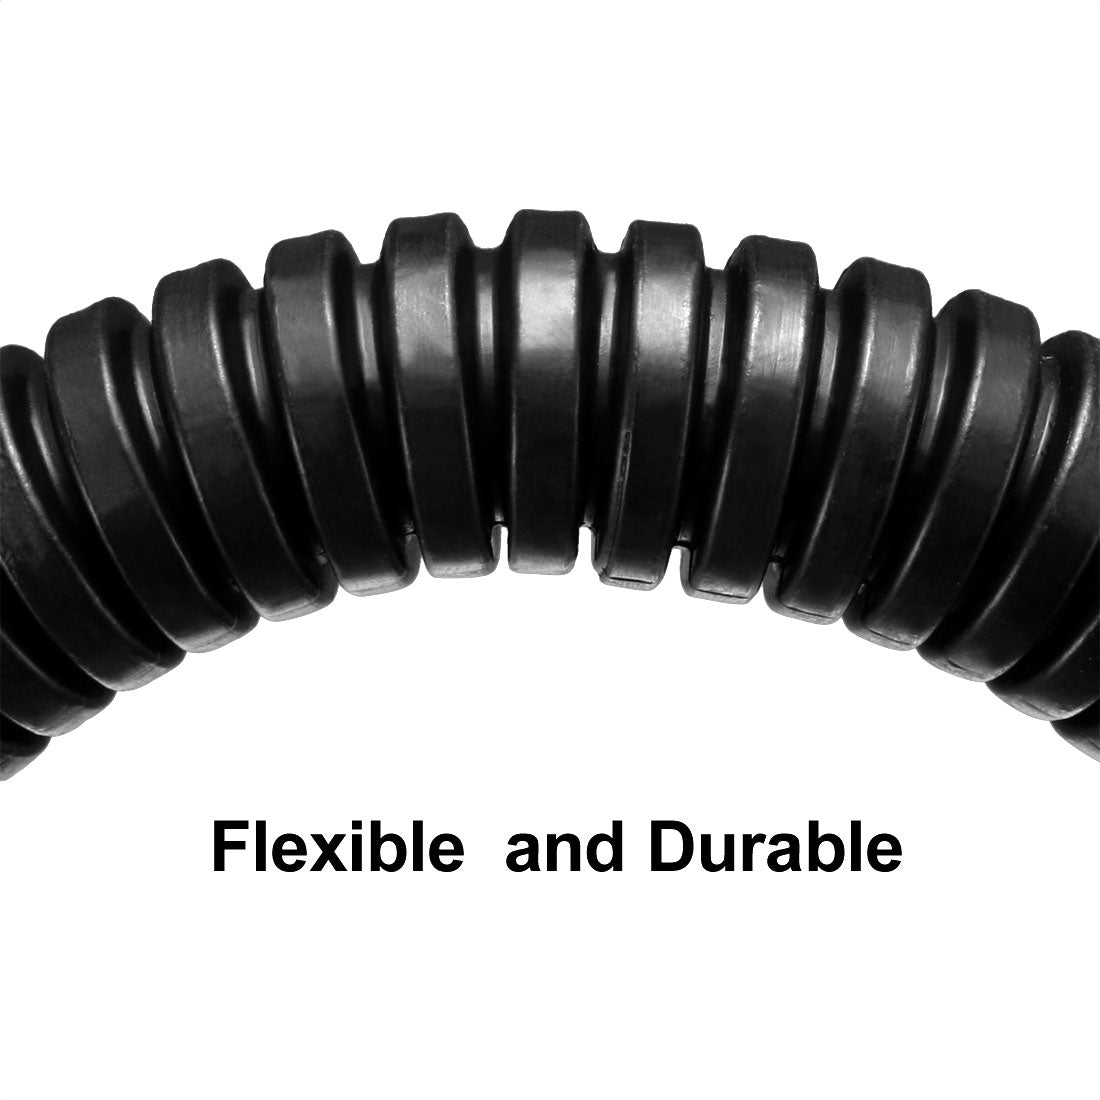 uxcell Uxcell 7 M 7 x 10 mm PP Flexible Corrugated Conduit Tube for Garden,Office Black